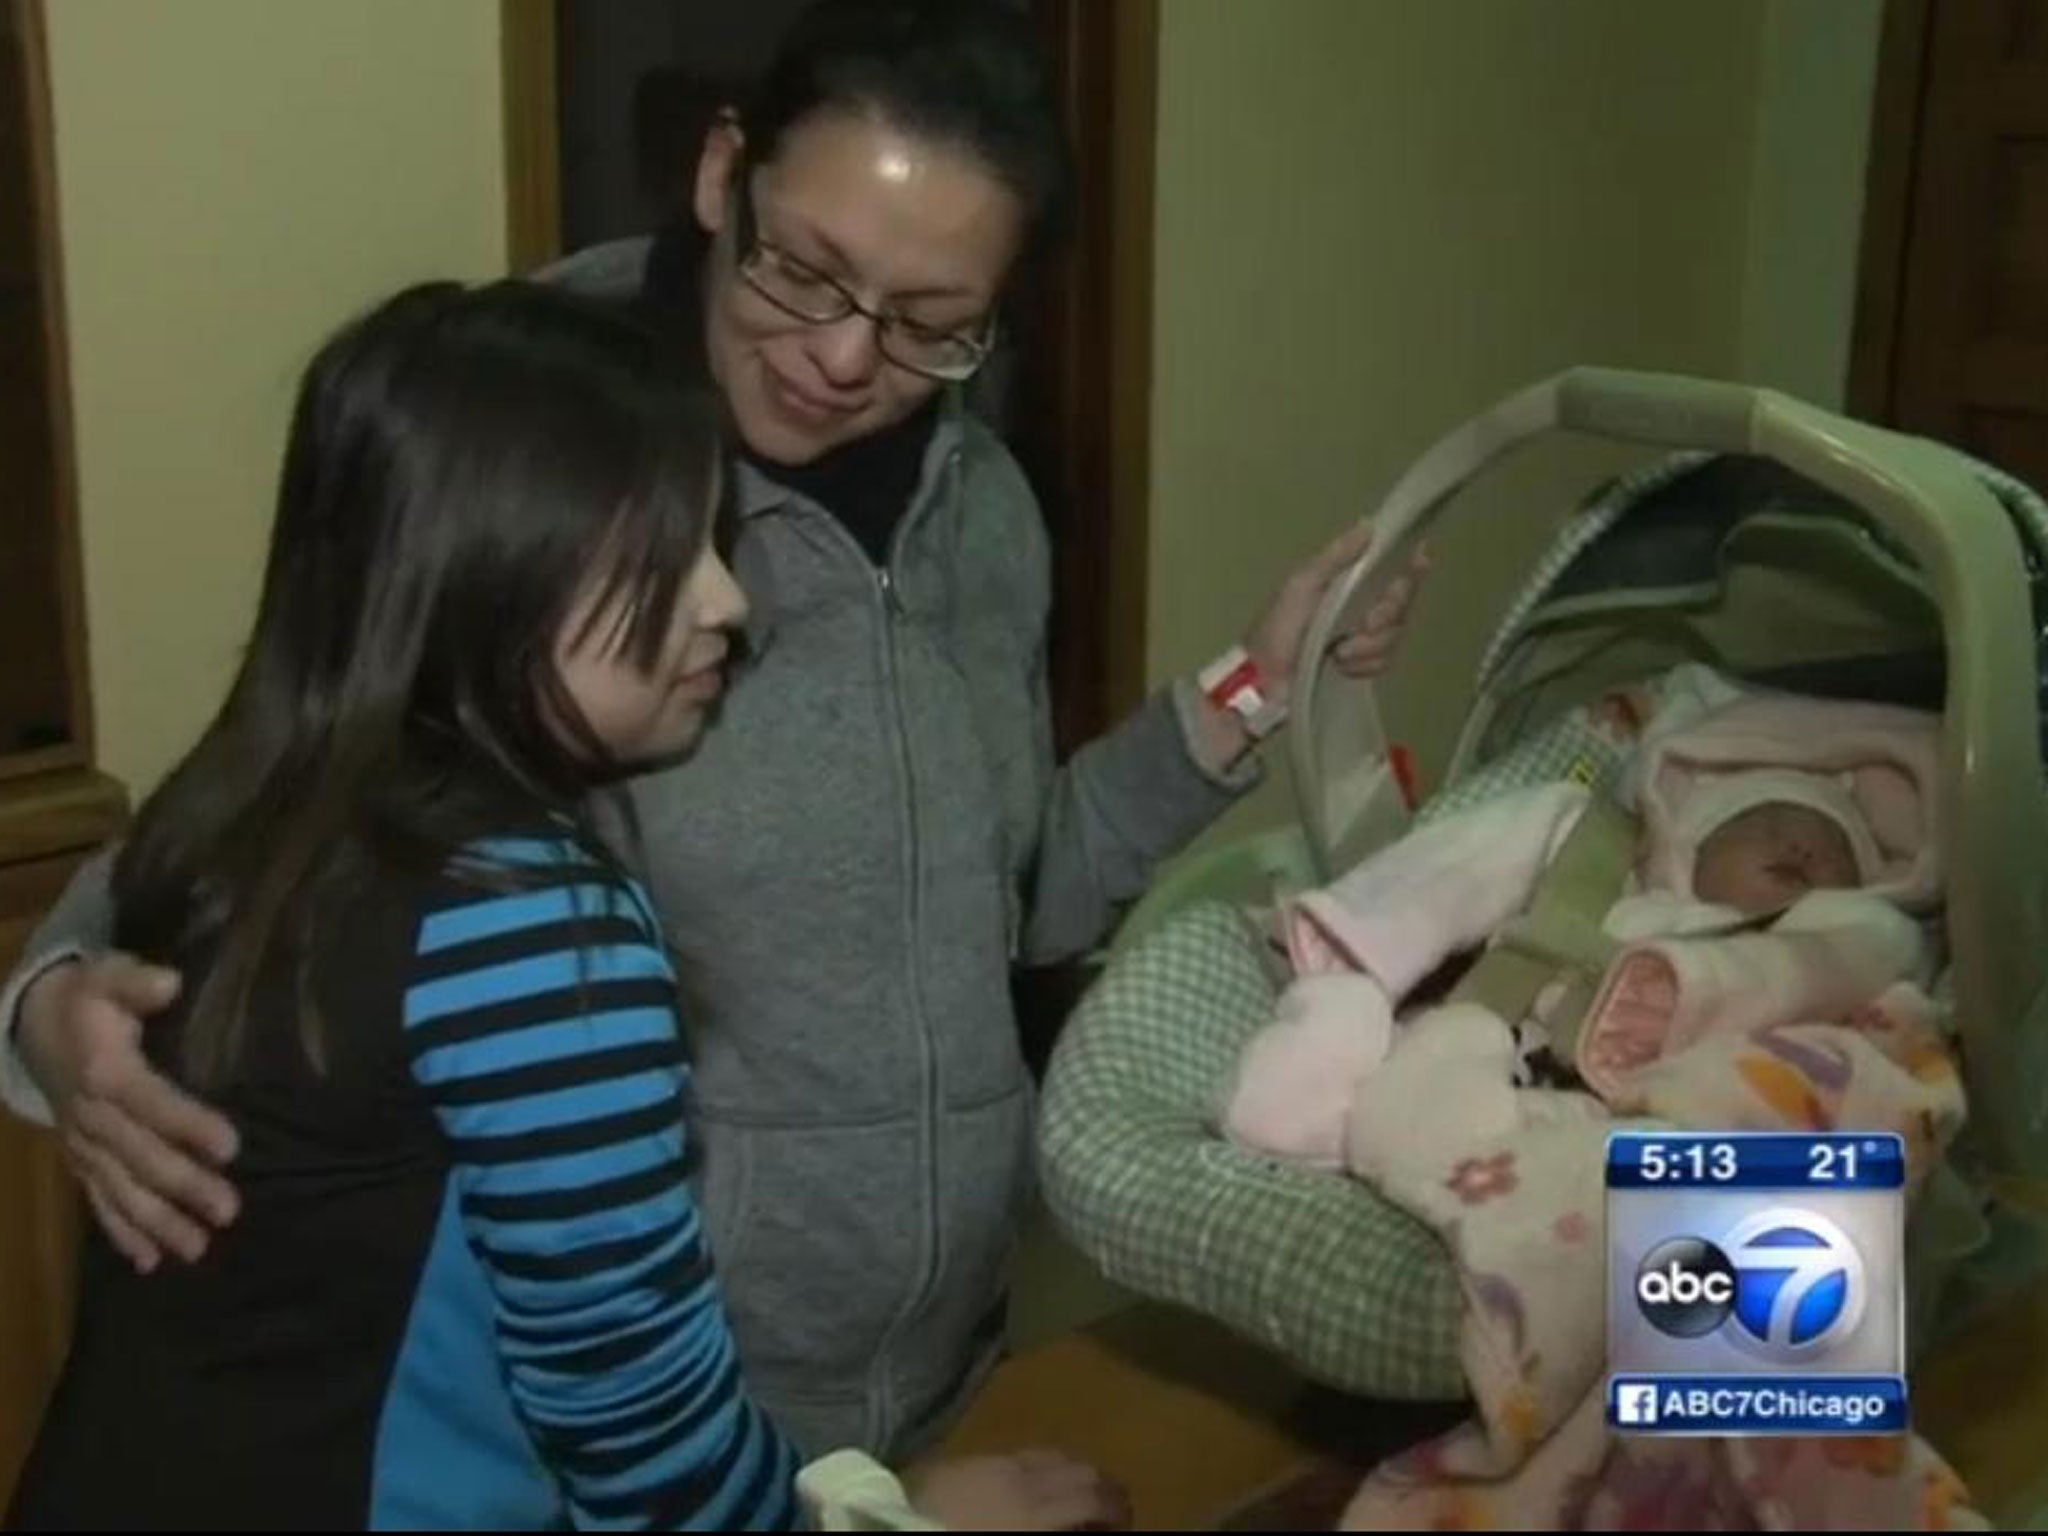 Nine-year-old Alyssa Meza successfully delivered her baby sister, who was born with the umbilical cord around her neck